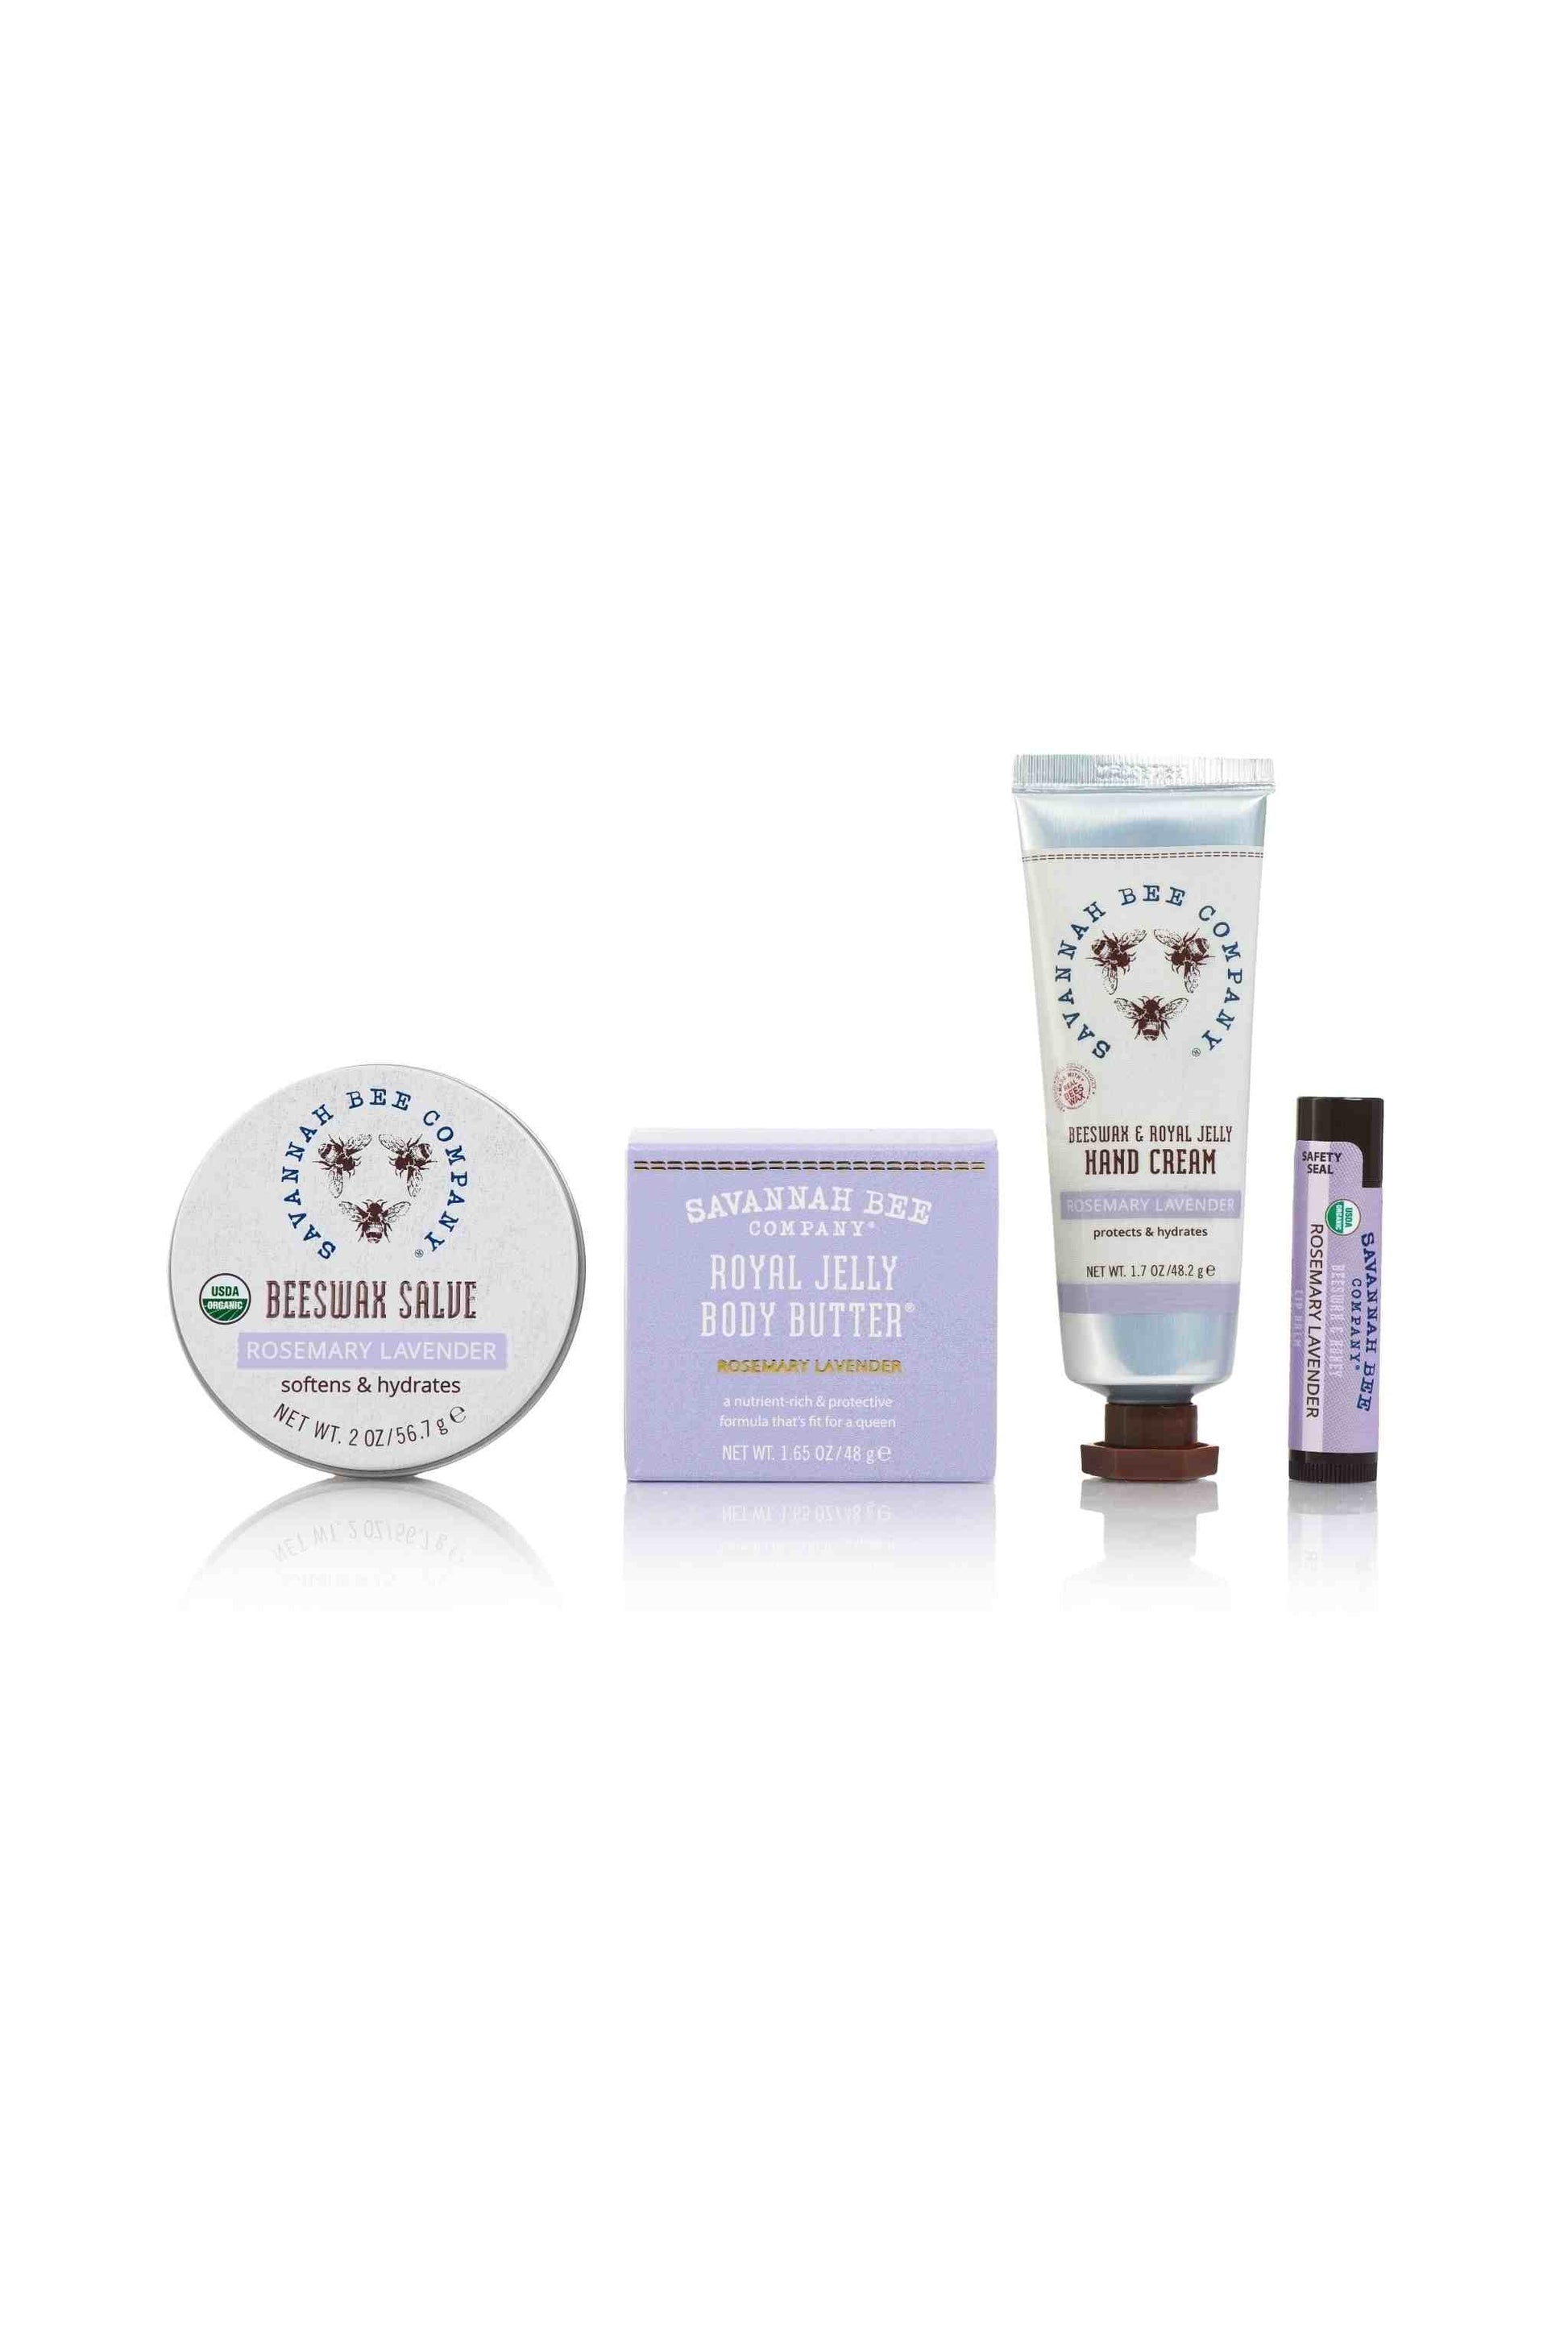 Lavender Love Gift Set contains Rosemary Lavender Beeswax Salve, Beeswax Royally Jelly Hand Cream, Royal Jelly Body Butter and Lip Balm